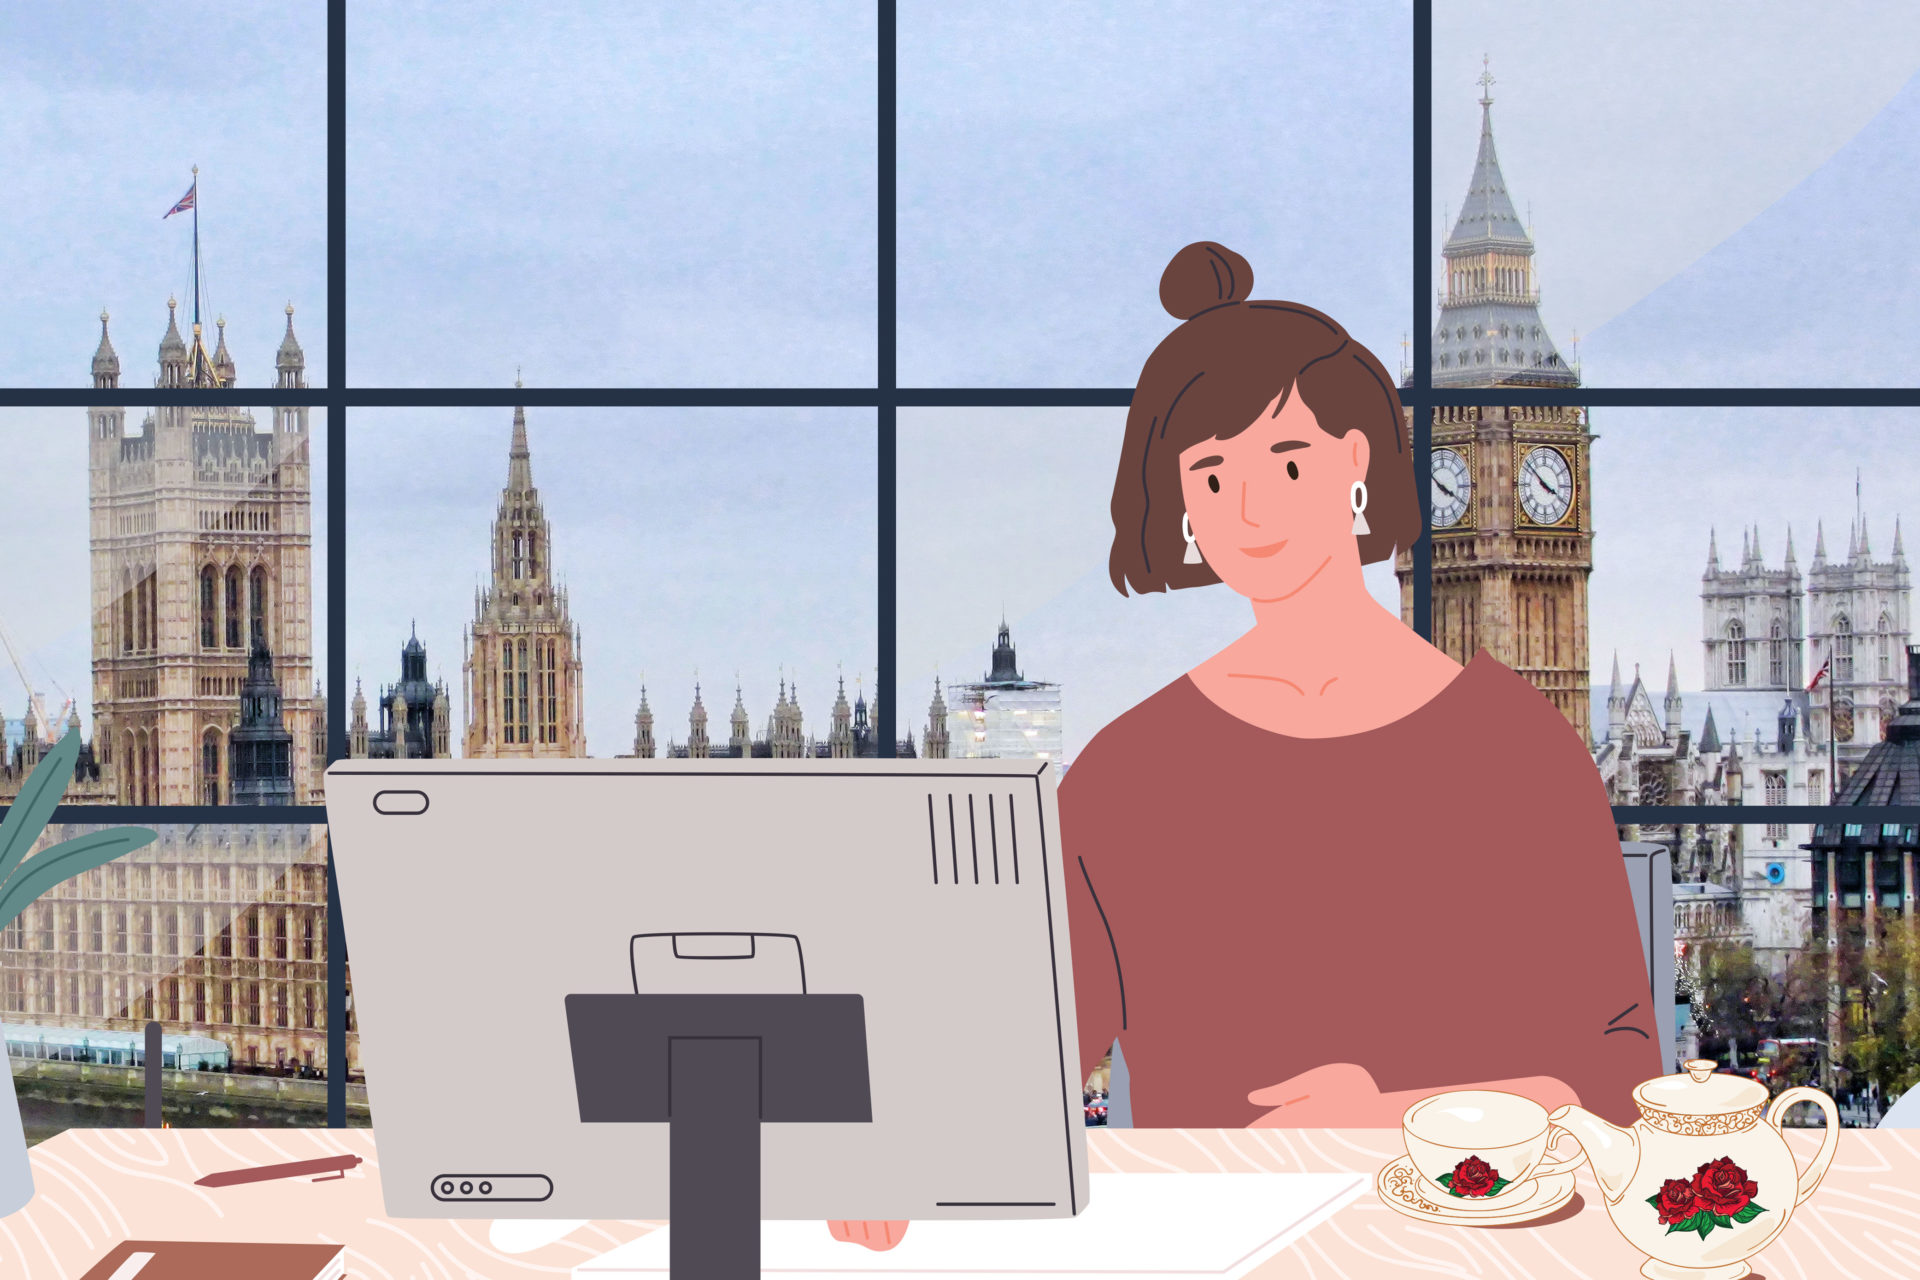 A person sitting at a computer at a desk. Behind her is a big window with a view of Big Ben and there is a pot of tea on her desk.